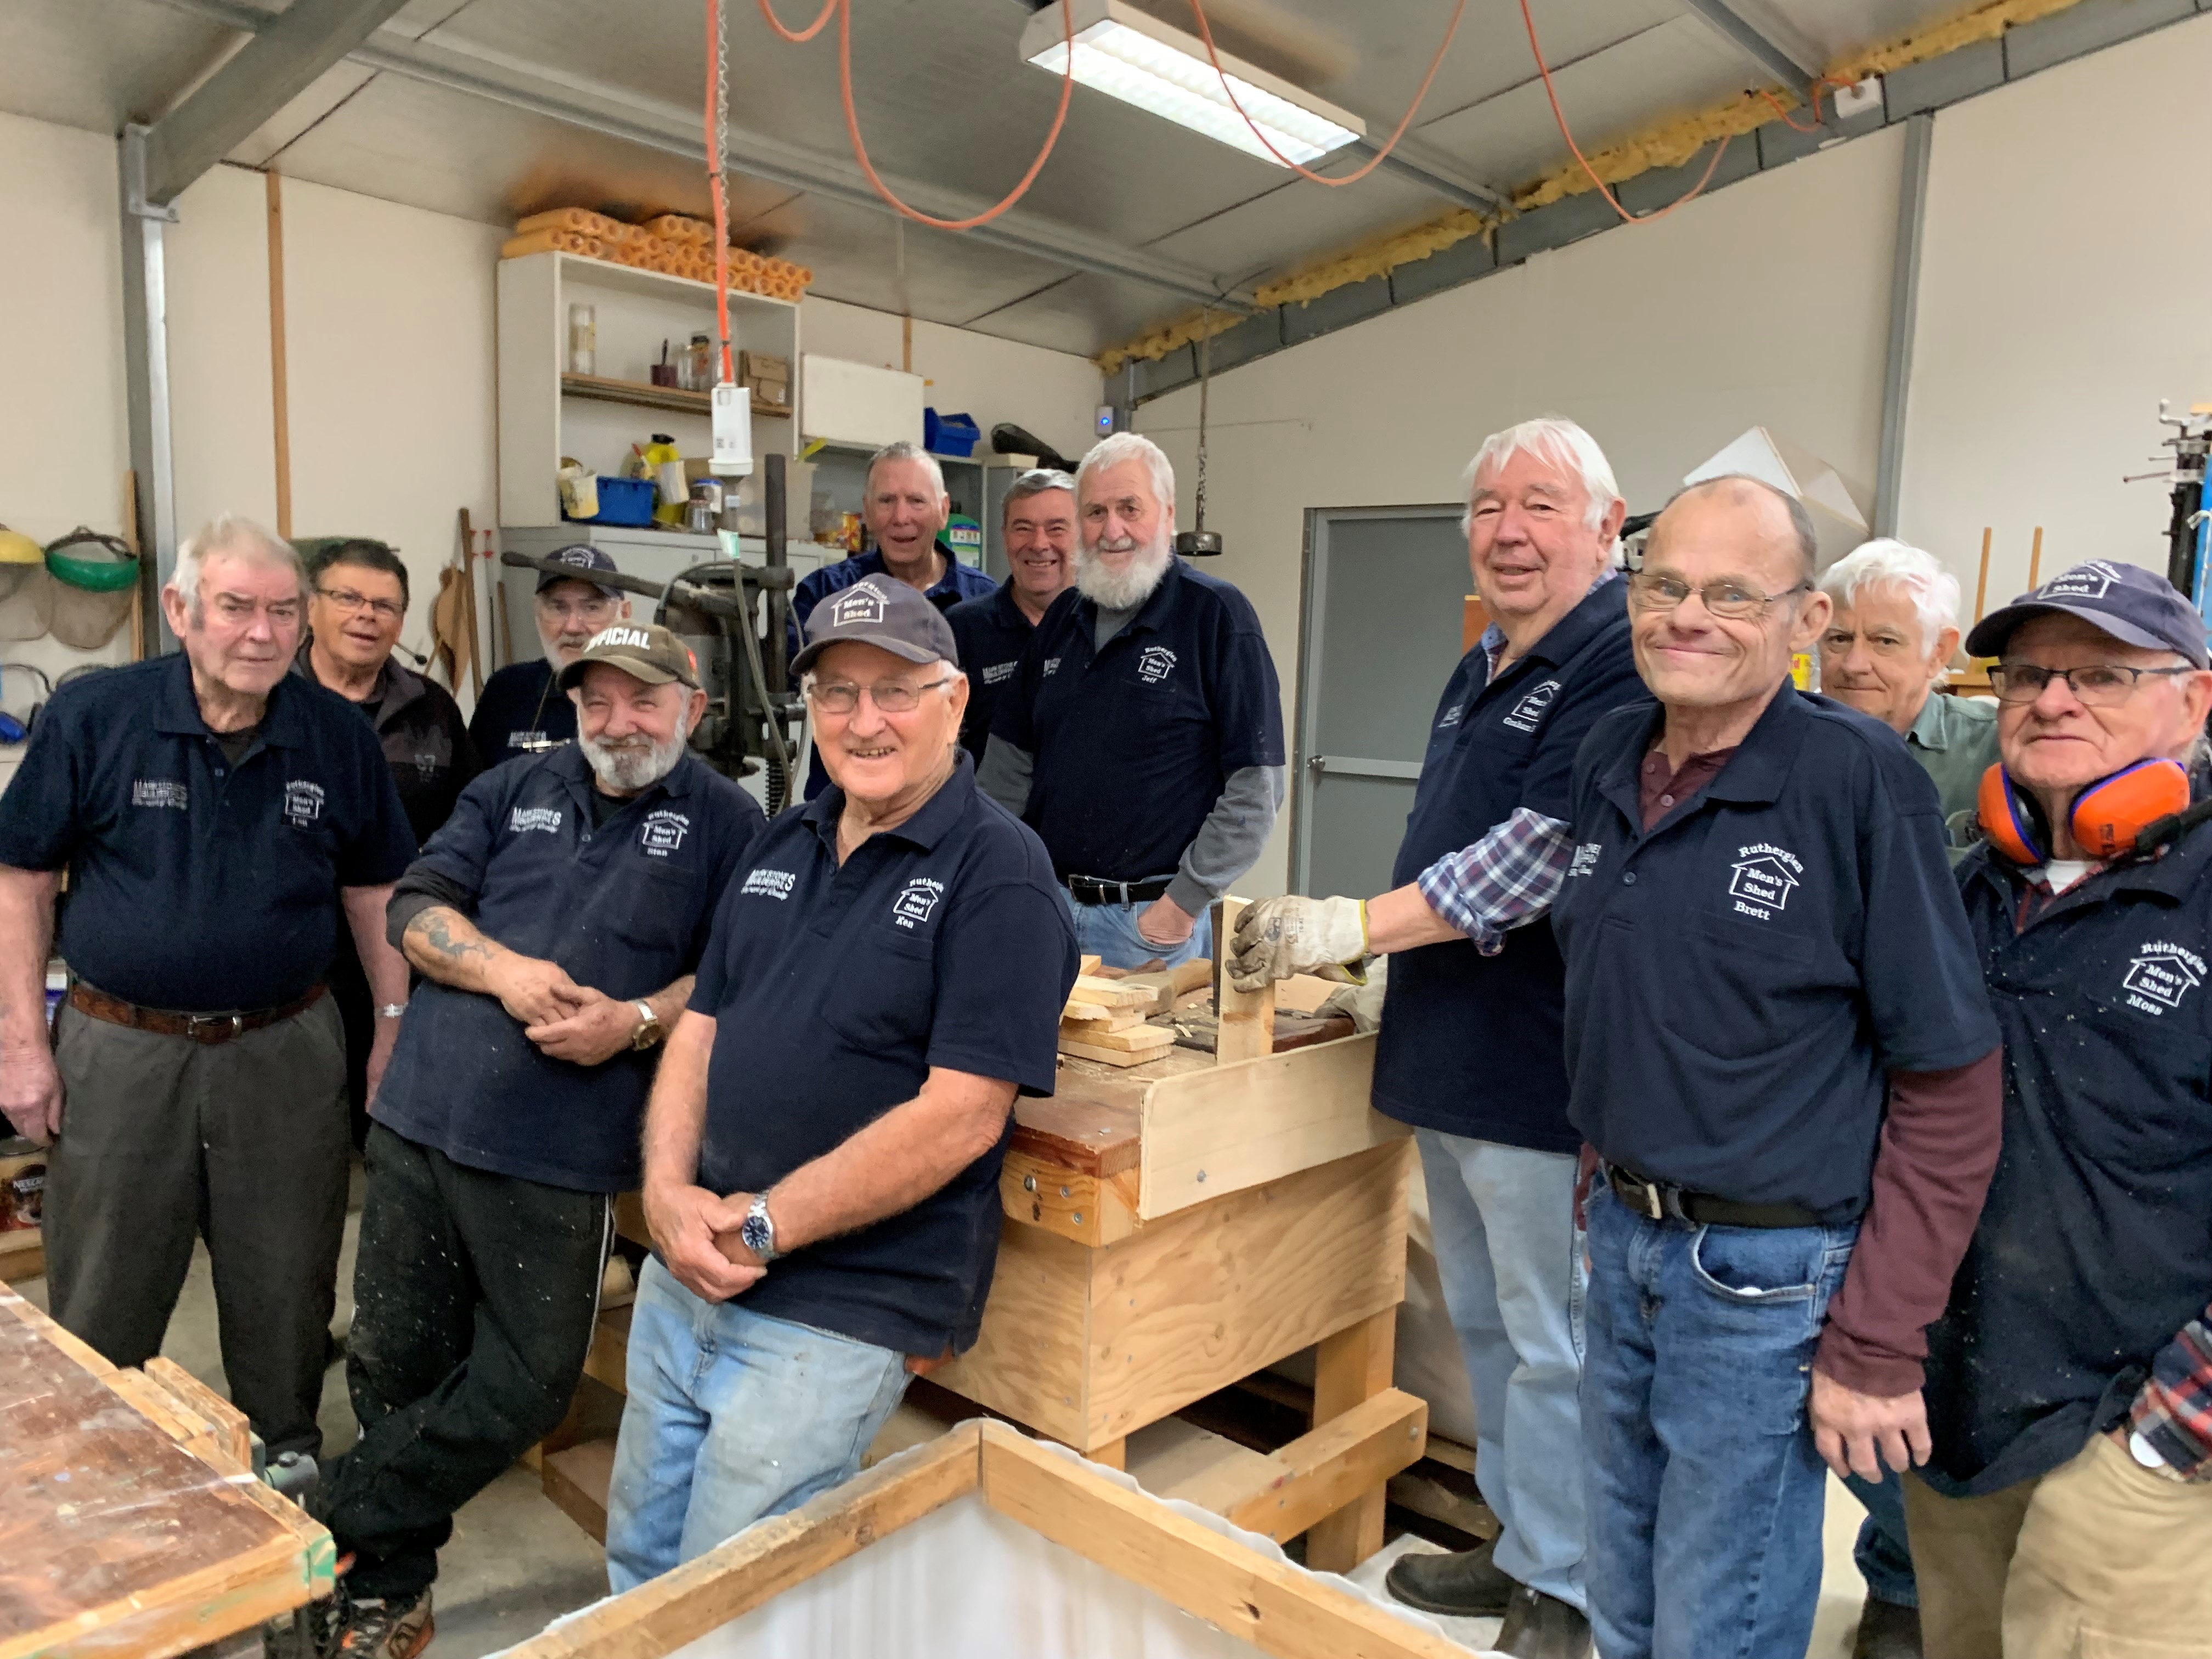 A dozen members of the Rutheglen Men's Shed stand around a work table in a shed.